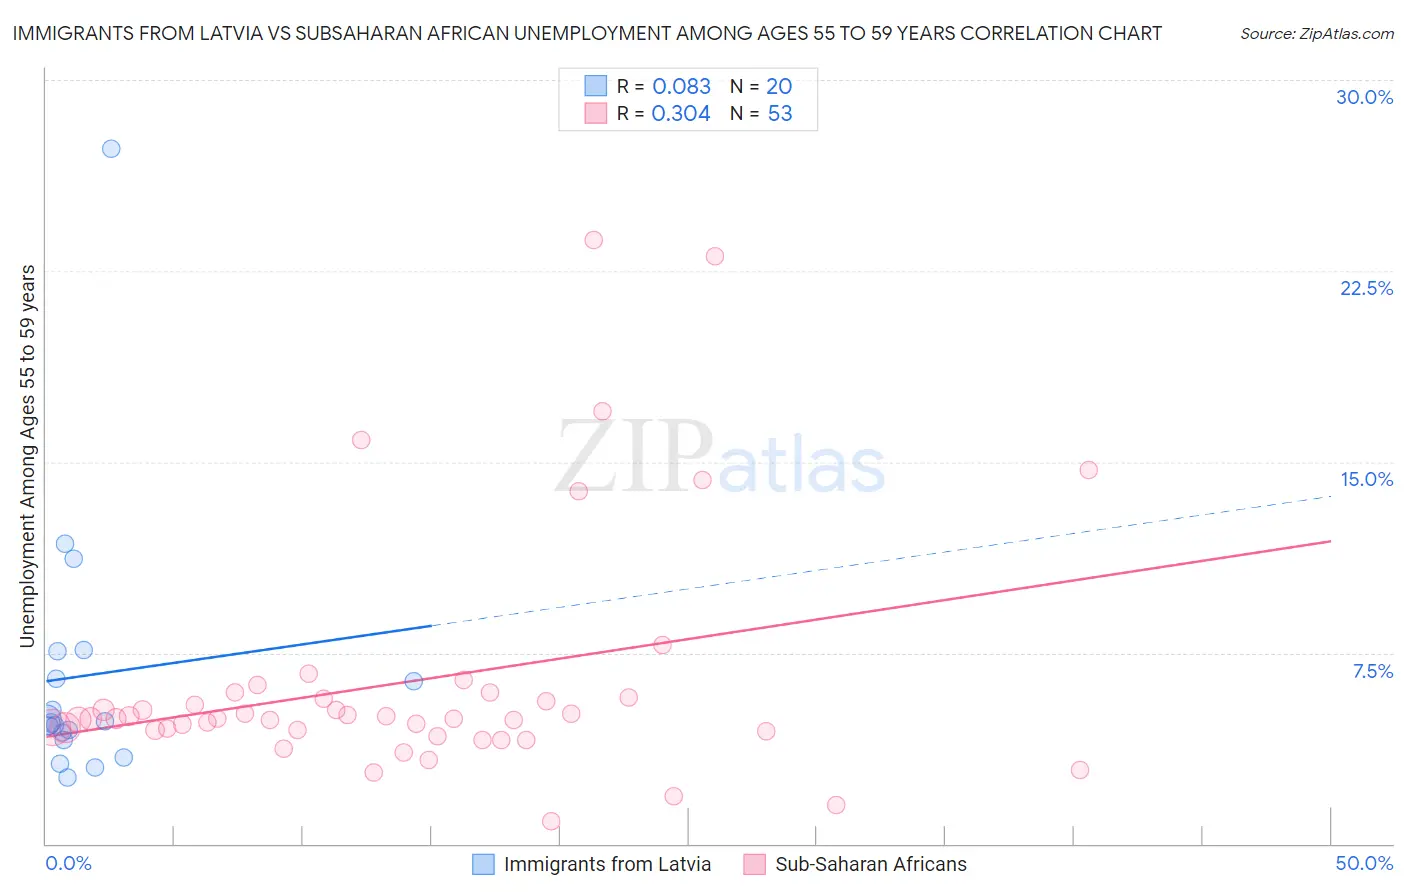 Immigrants from Latvia vs Subsaharan African Unemployment Among Ages 55 to 59 years